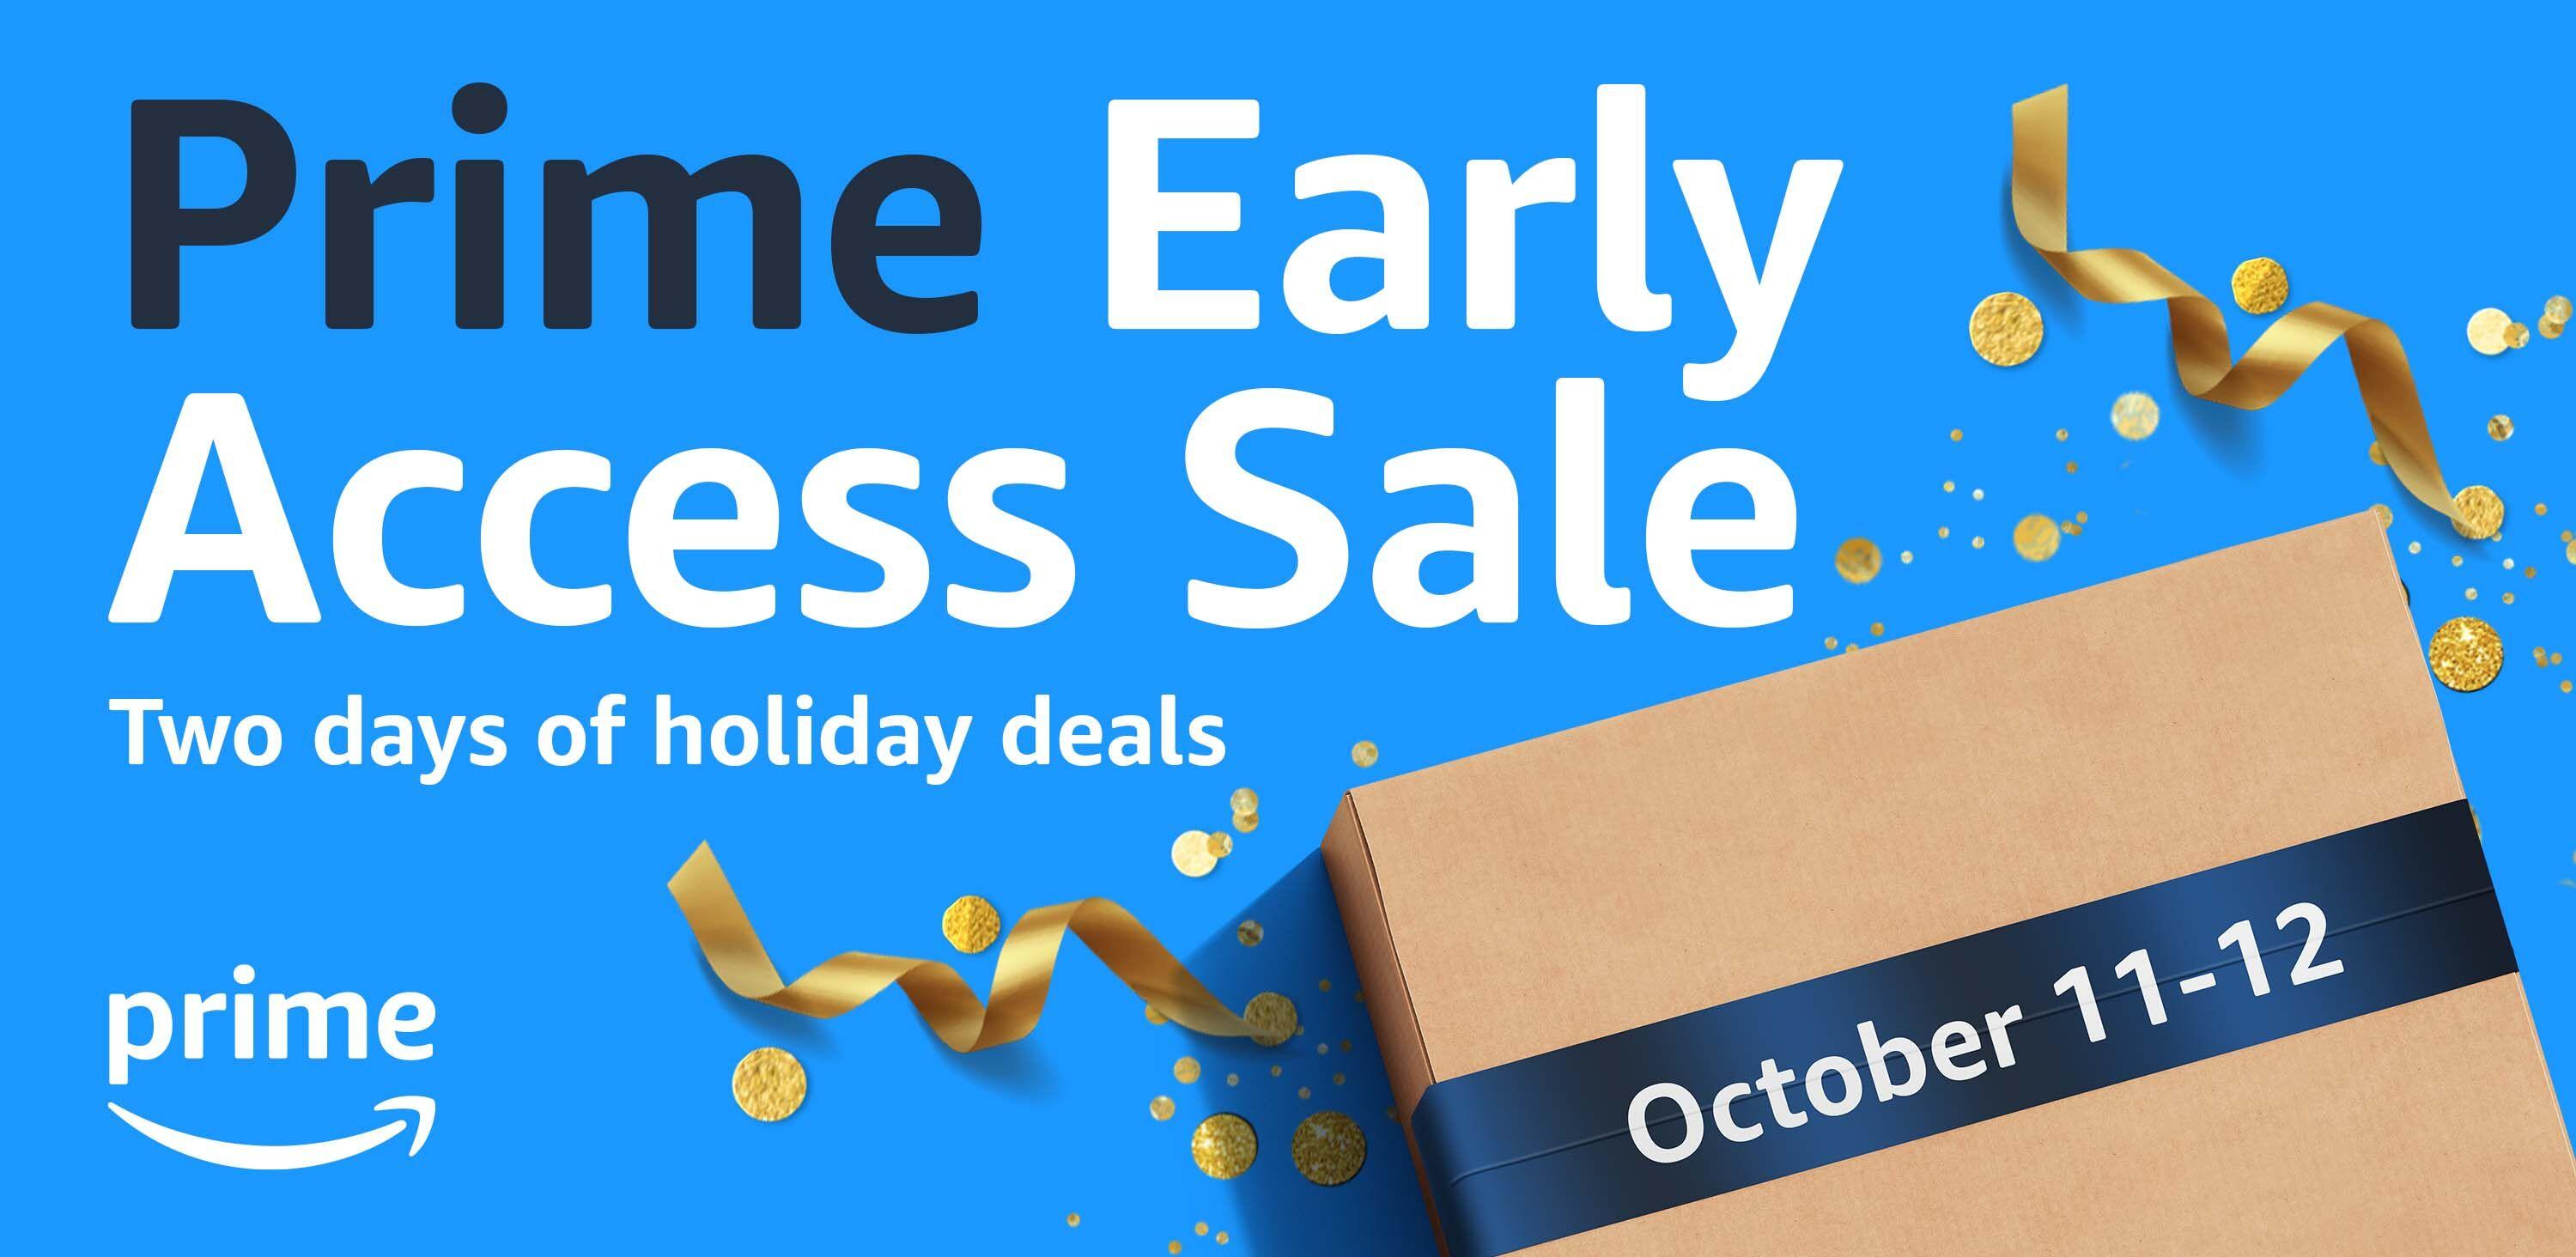 Amazon's Prime Early Access Sale is Coming October 1112 TV Guide